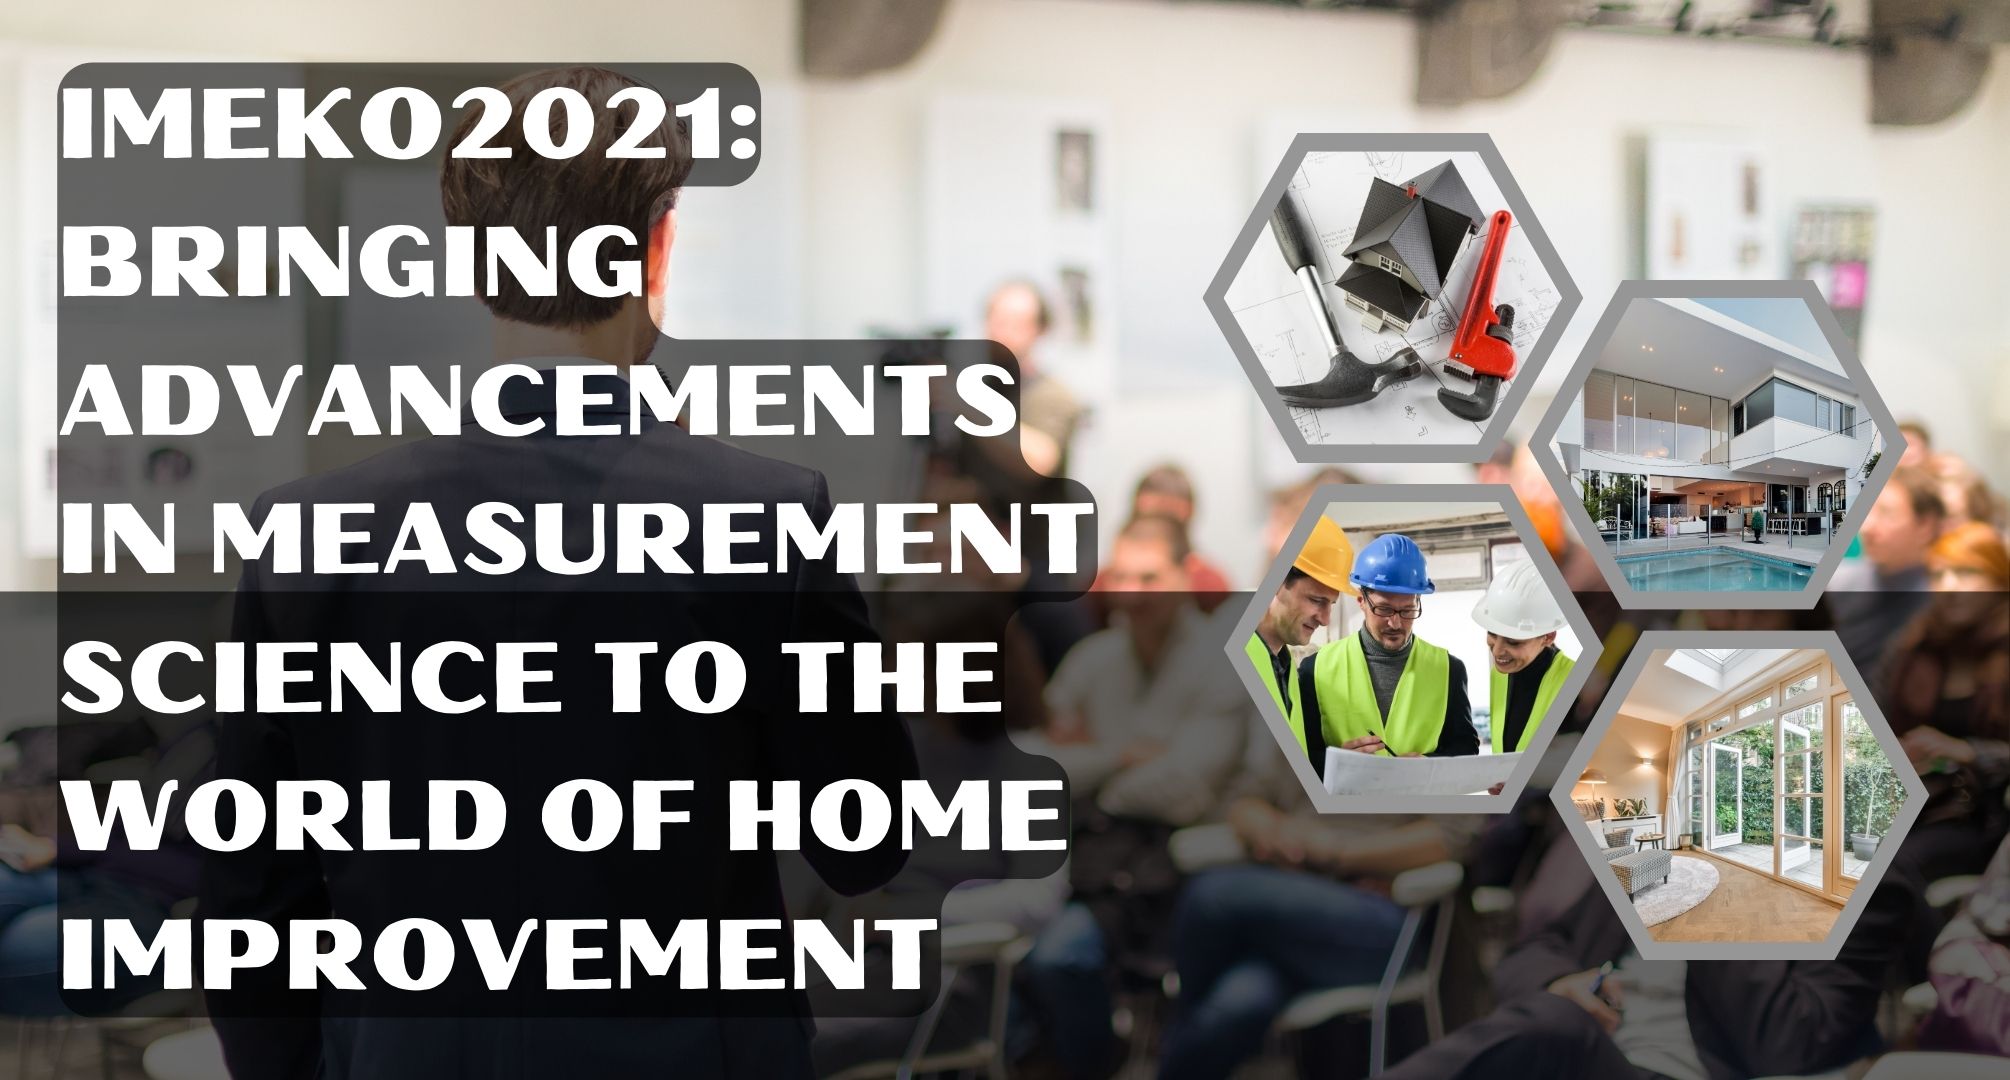 IMEKO2021 Bringing Advancements in Measurement Science to the World of Home Improvement